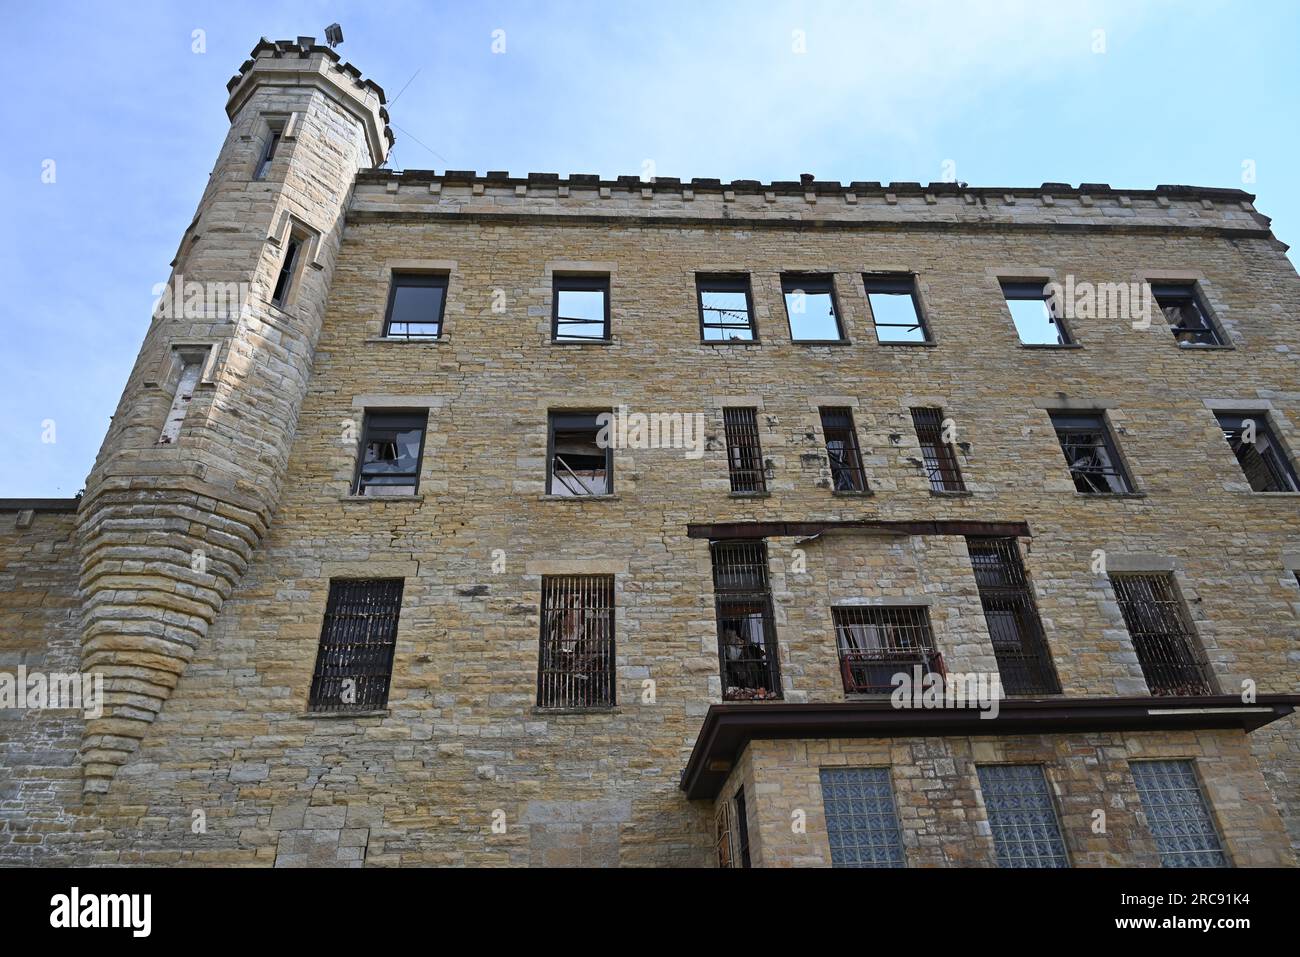 The roof is gone on the crumbling administration building that sits abandoned at the Old Joliet Prison, which opened in 1858 and closed in 2002. Stock Photo